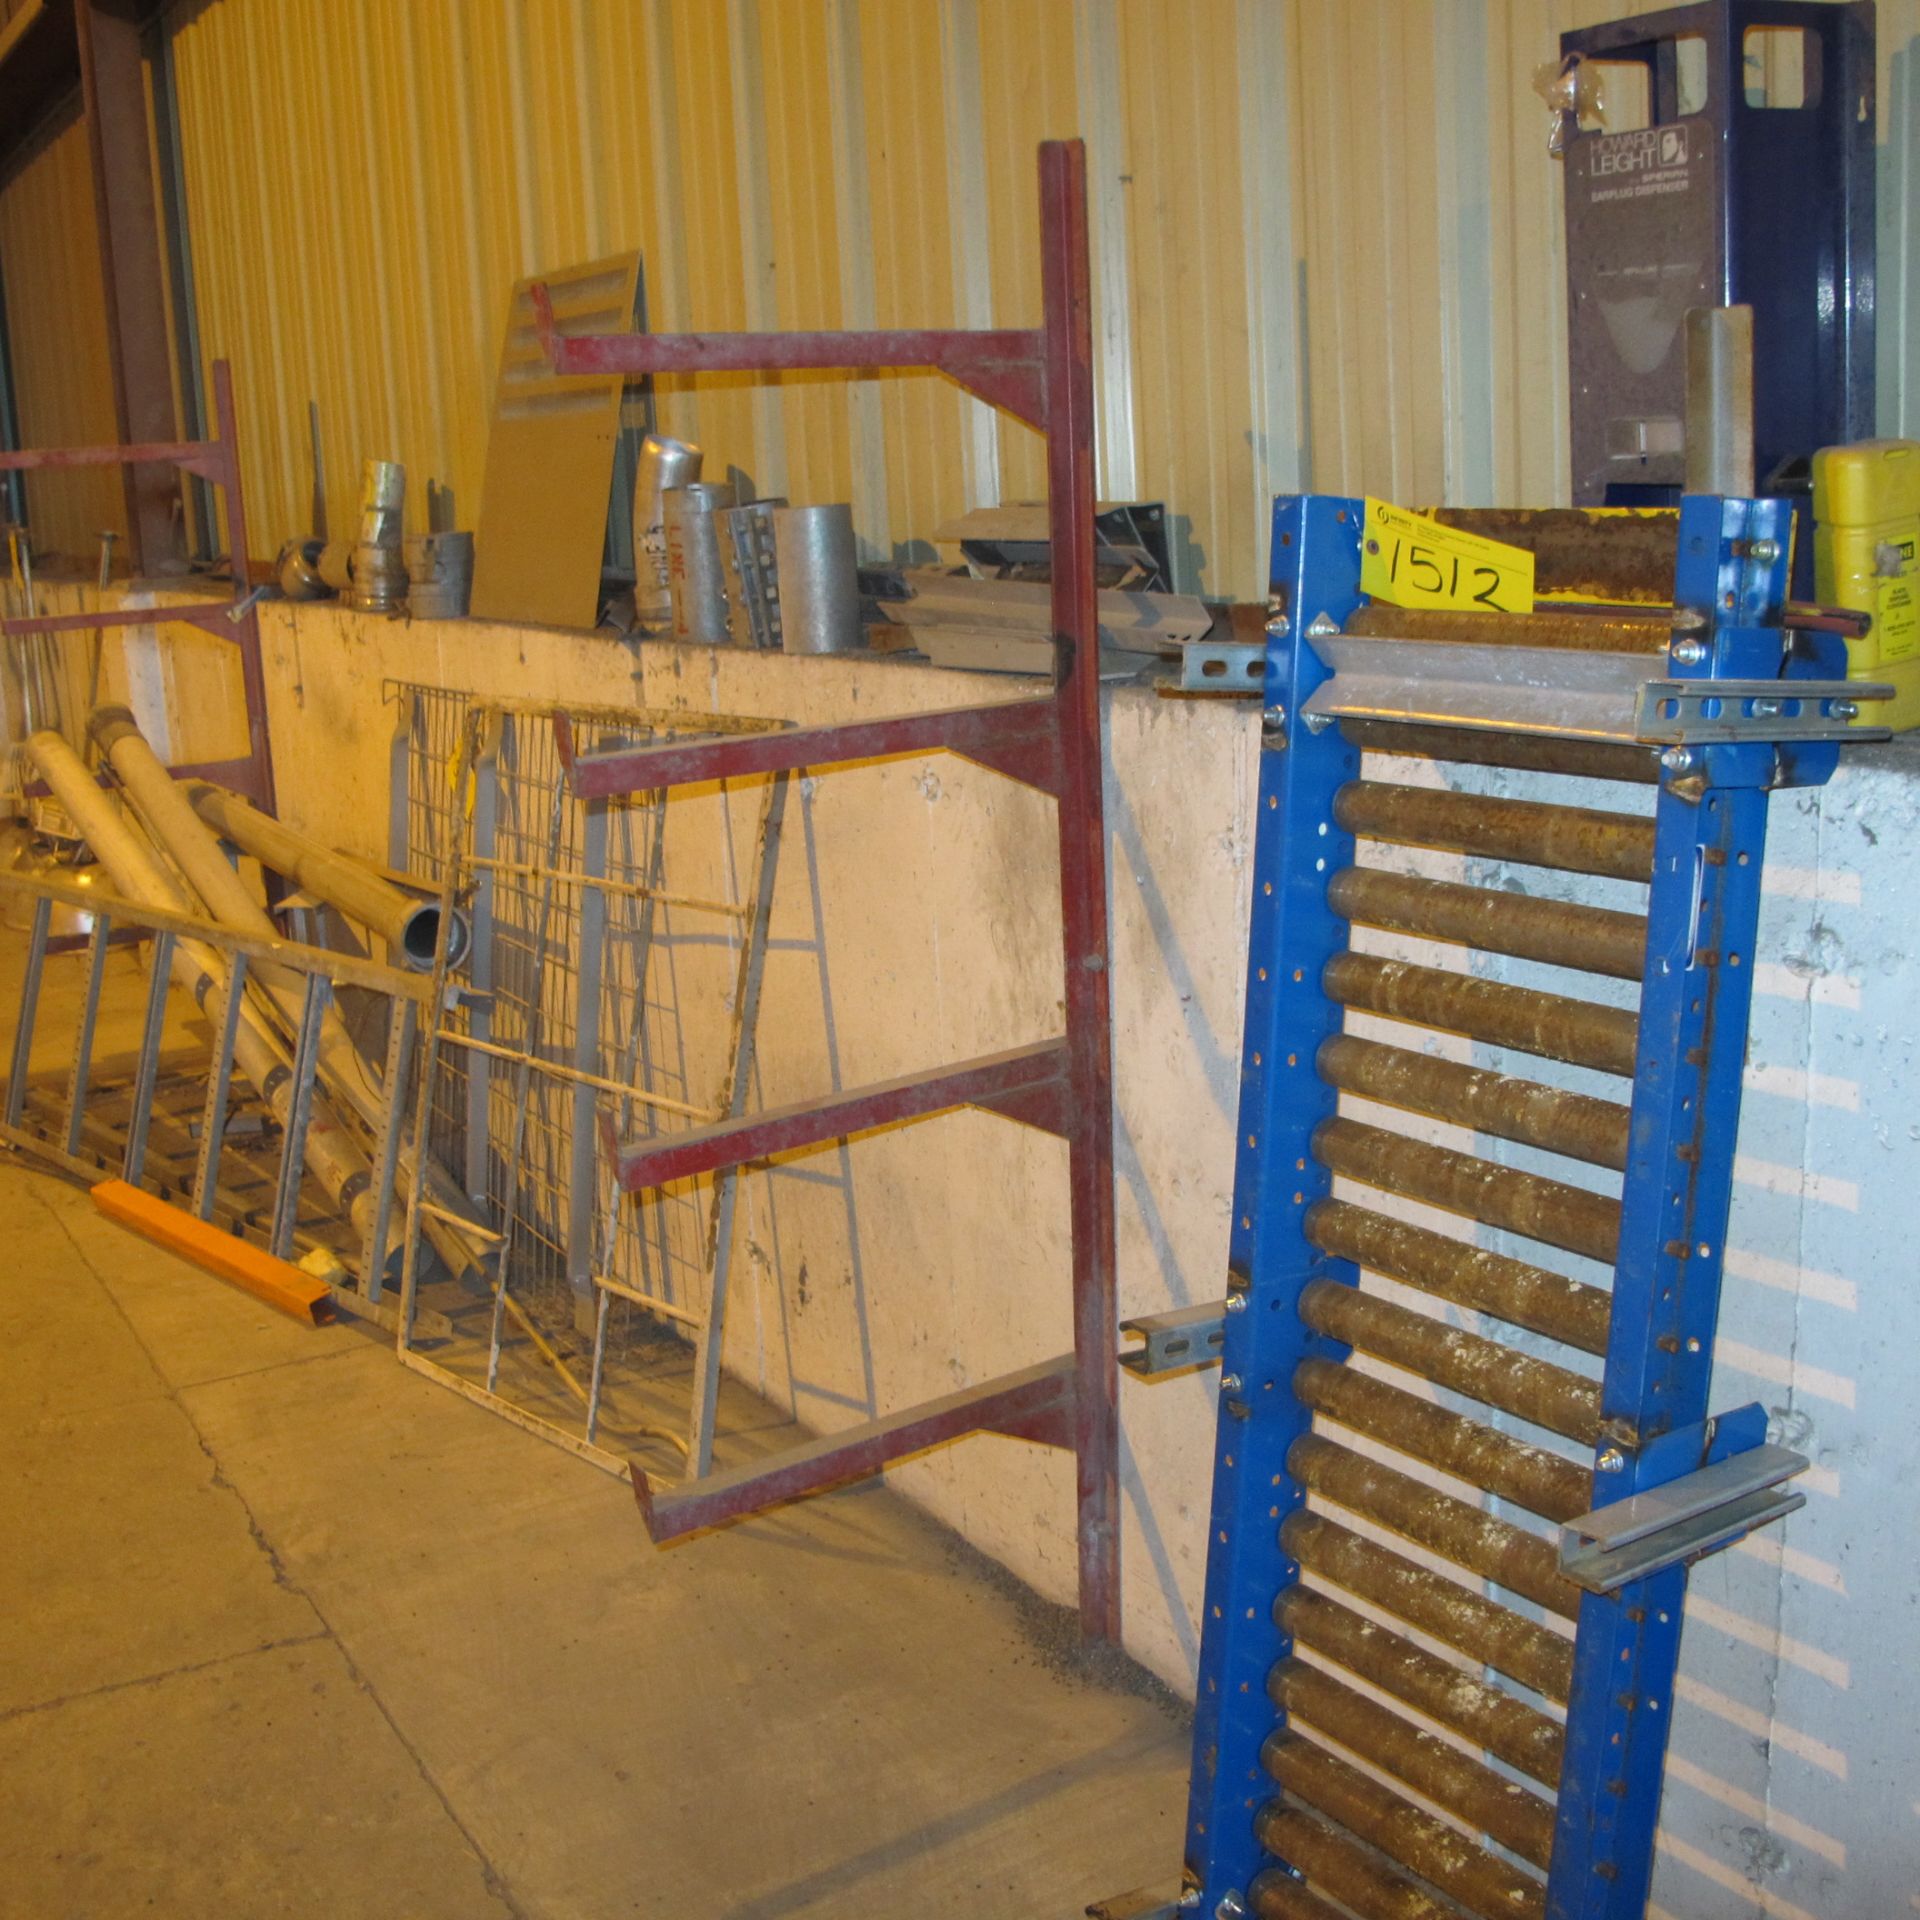 LOT OF FILTER CAGES, STANDS, CRATES, LAMPS AND METAL PARTS - ALONG WEST WALL